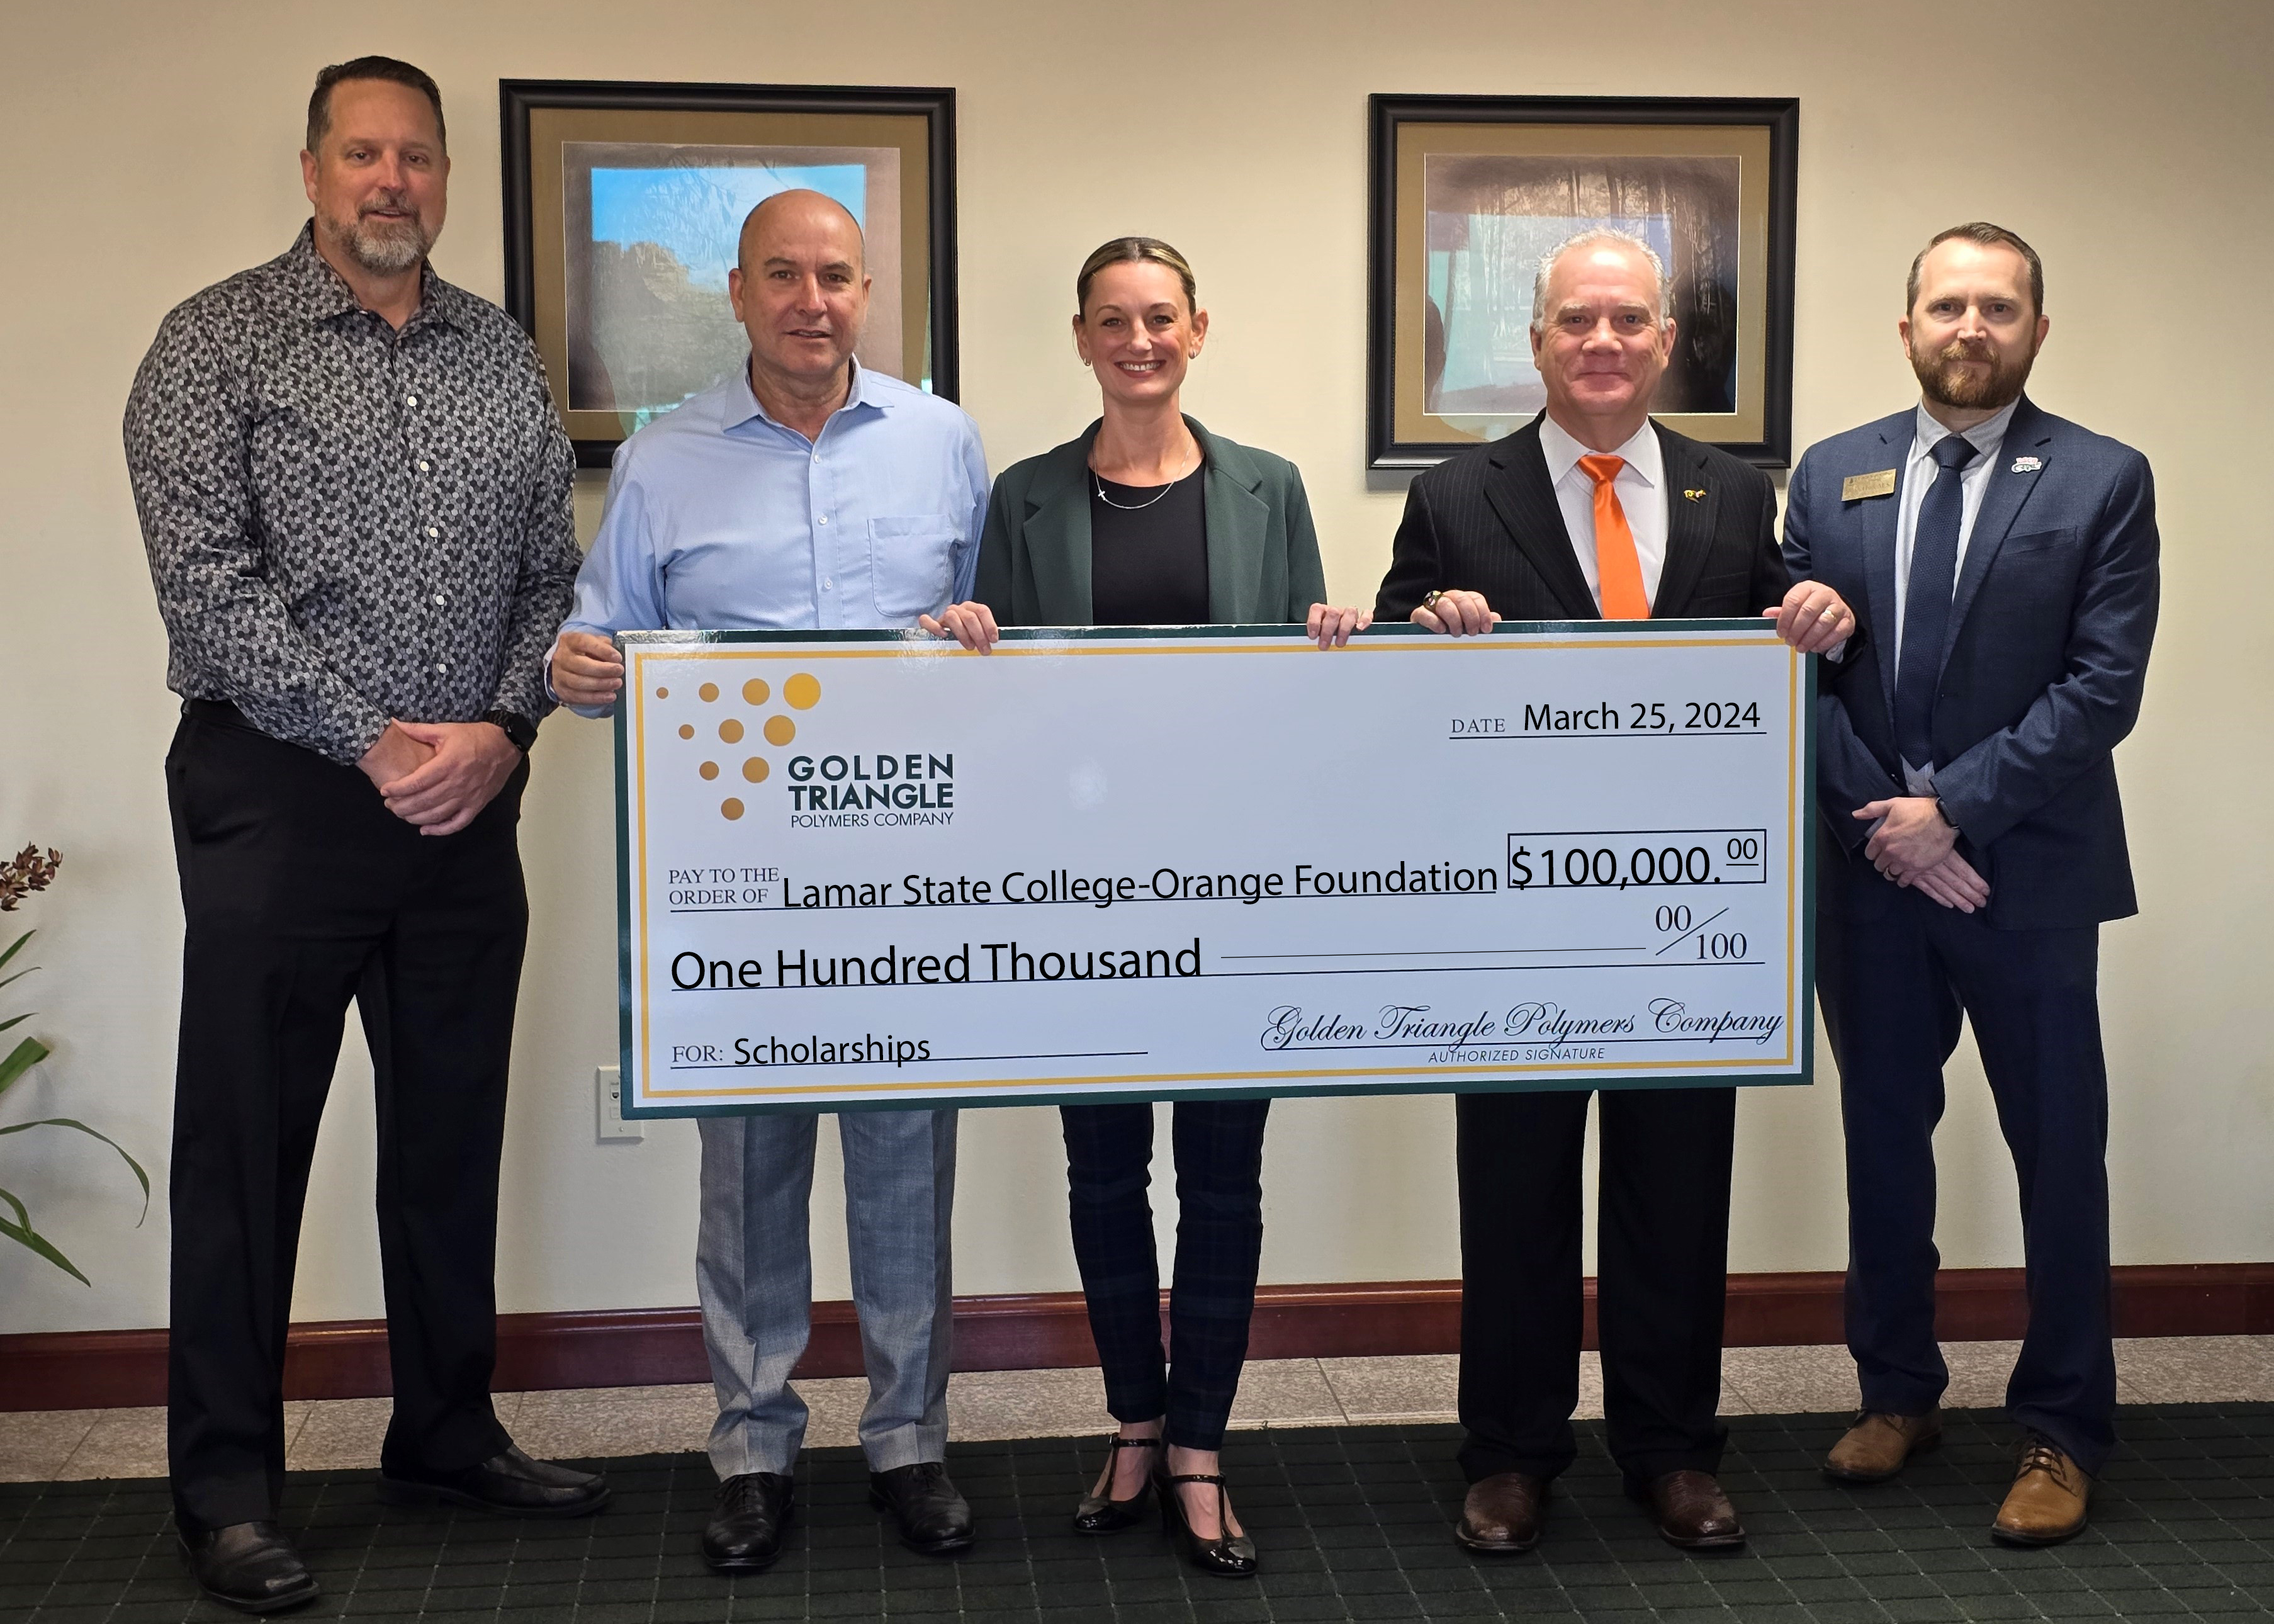 Golden Triangle Polymers donates $100,000 to Lamar State College-Orange Foundation for student scholarship program 